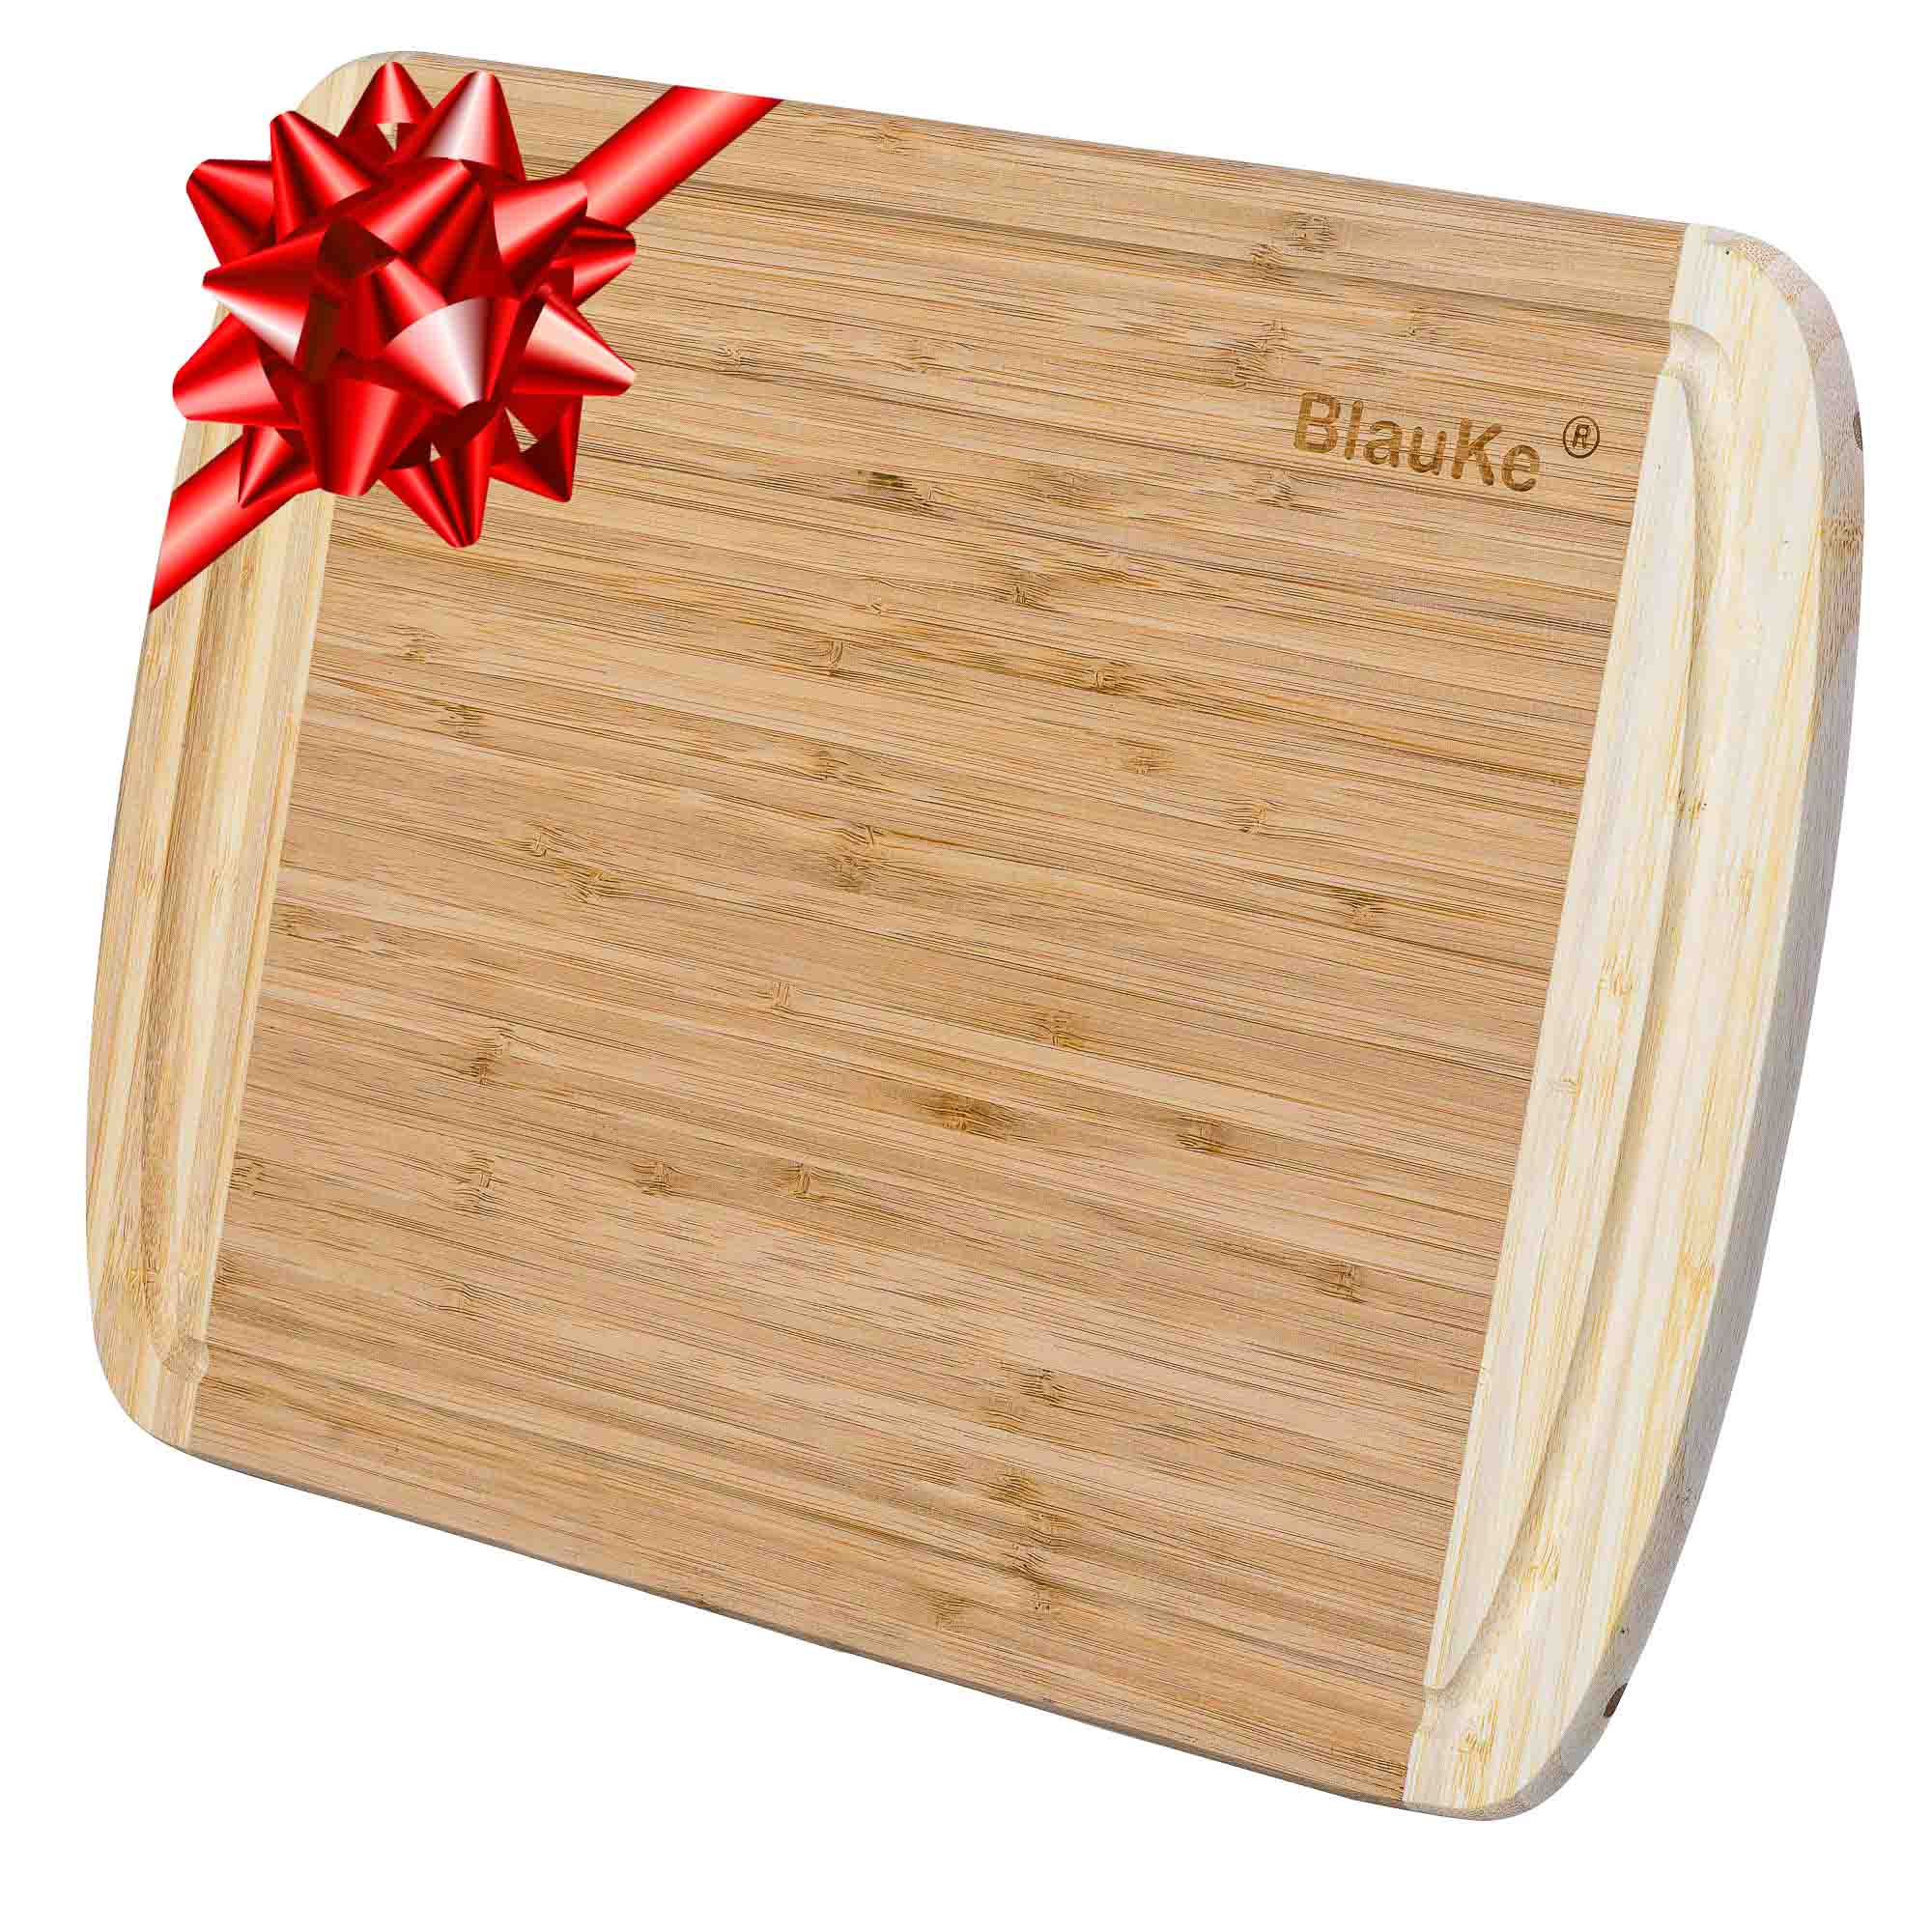  Wooden Cutting Boards for Kitchen: Organic Bamboo Wood Cutting  Board with Juice Grooves - Best Wood Cutting Board for Meat & Vegetables -  Large Decorative Serving Tray & Wood Cheese Board